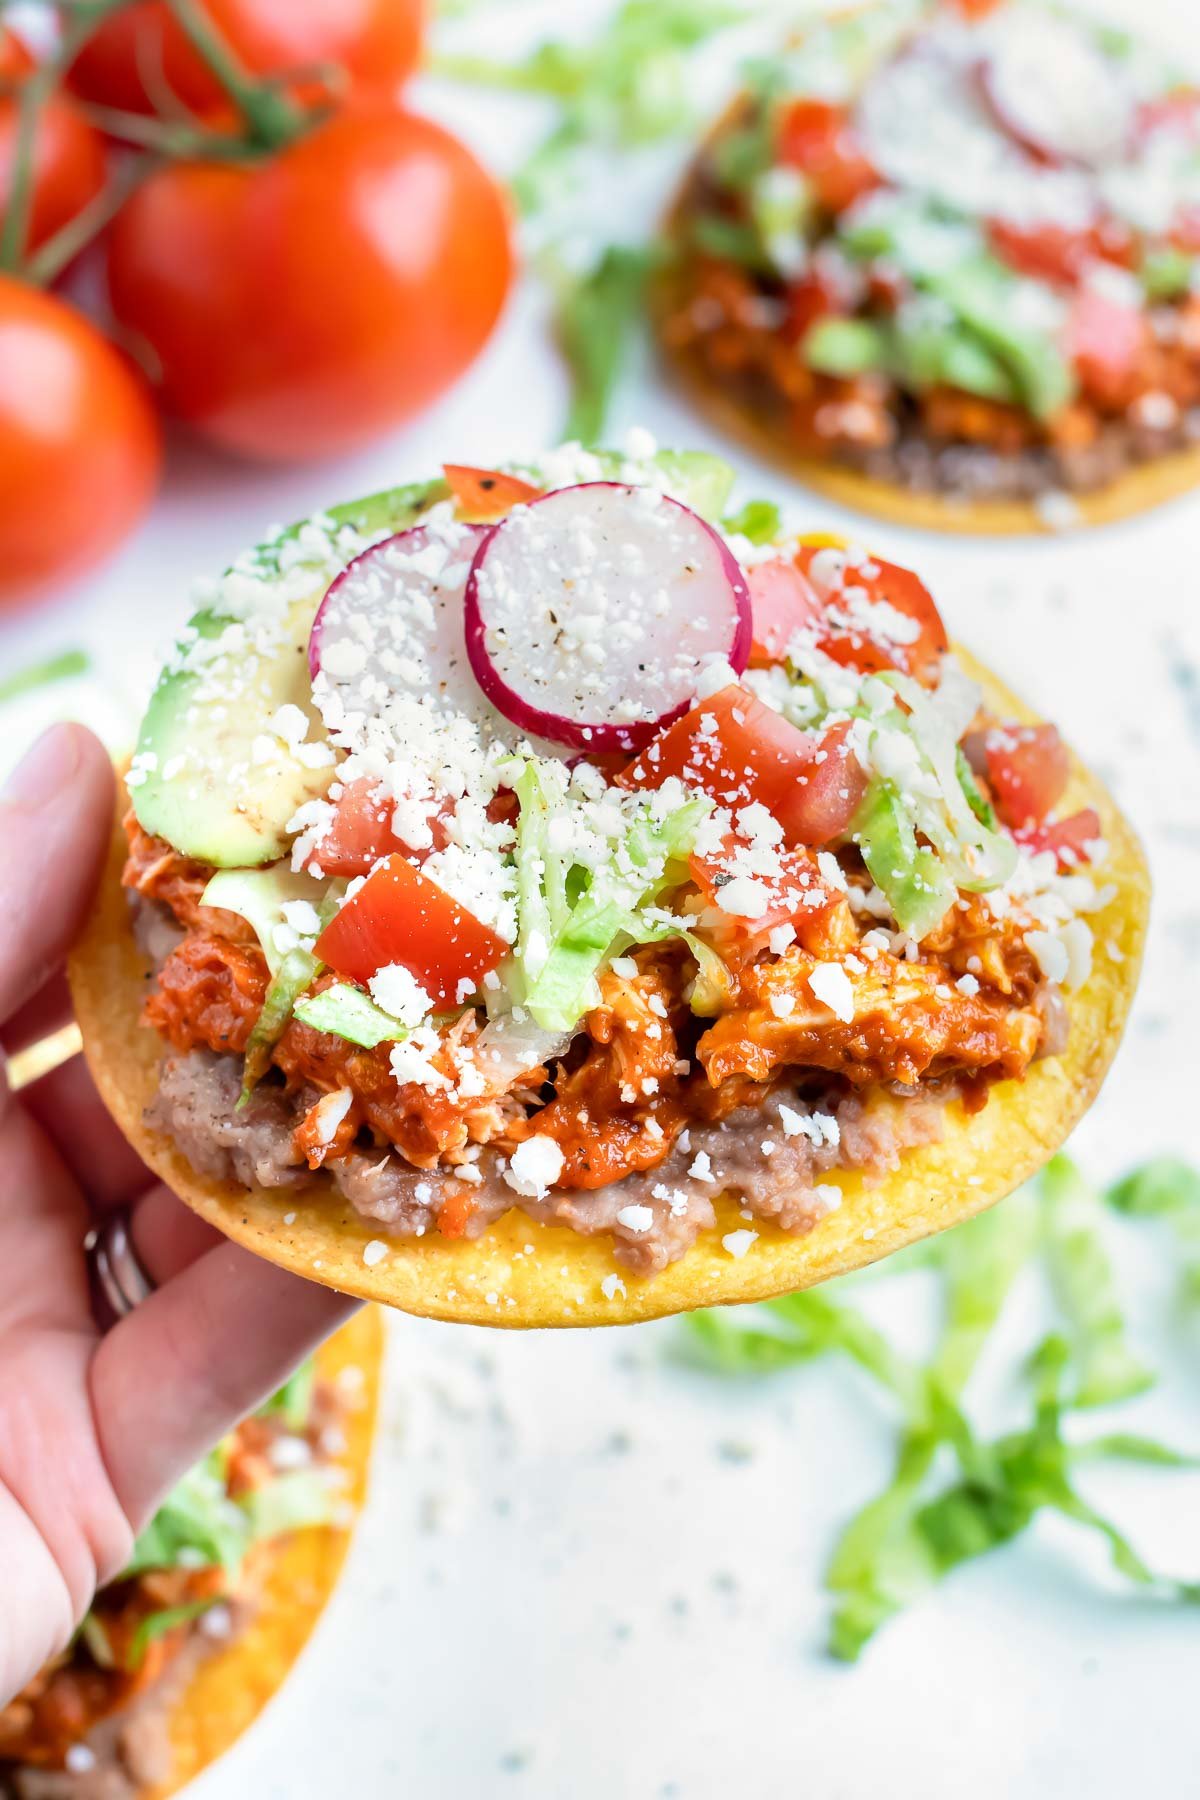 A chicken tinga tostada is held in a hand for an appetizer.